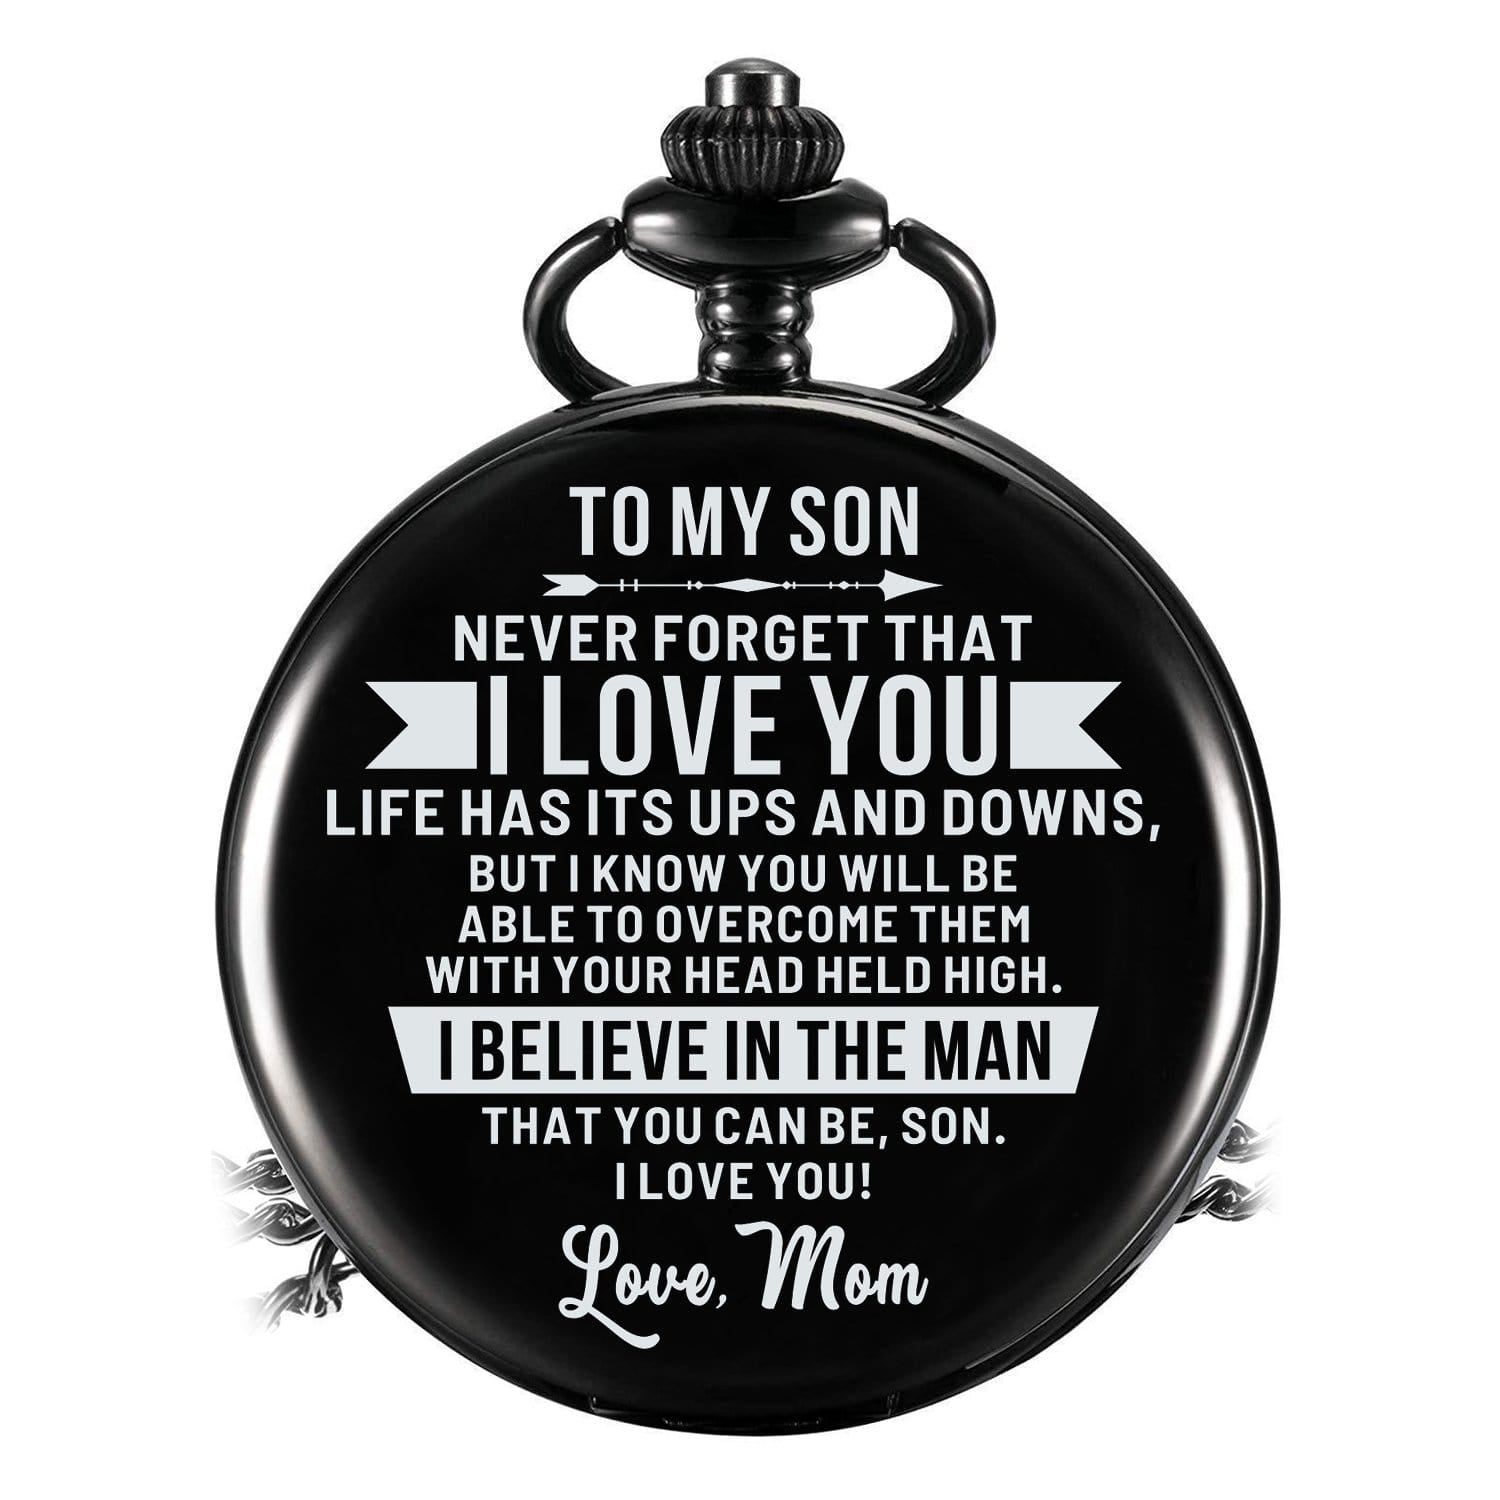 Pocket Watches Mom To Son - I Believe In The Man Pocket Watch GiveMe-Gifts